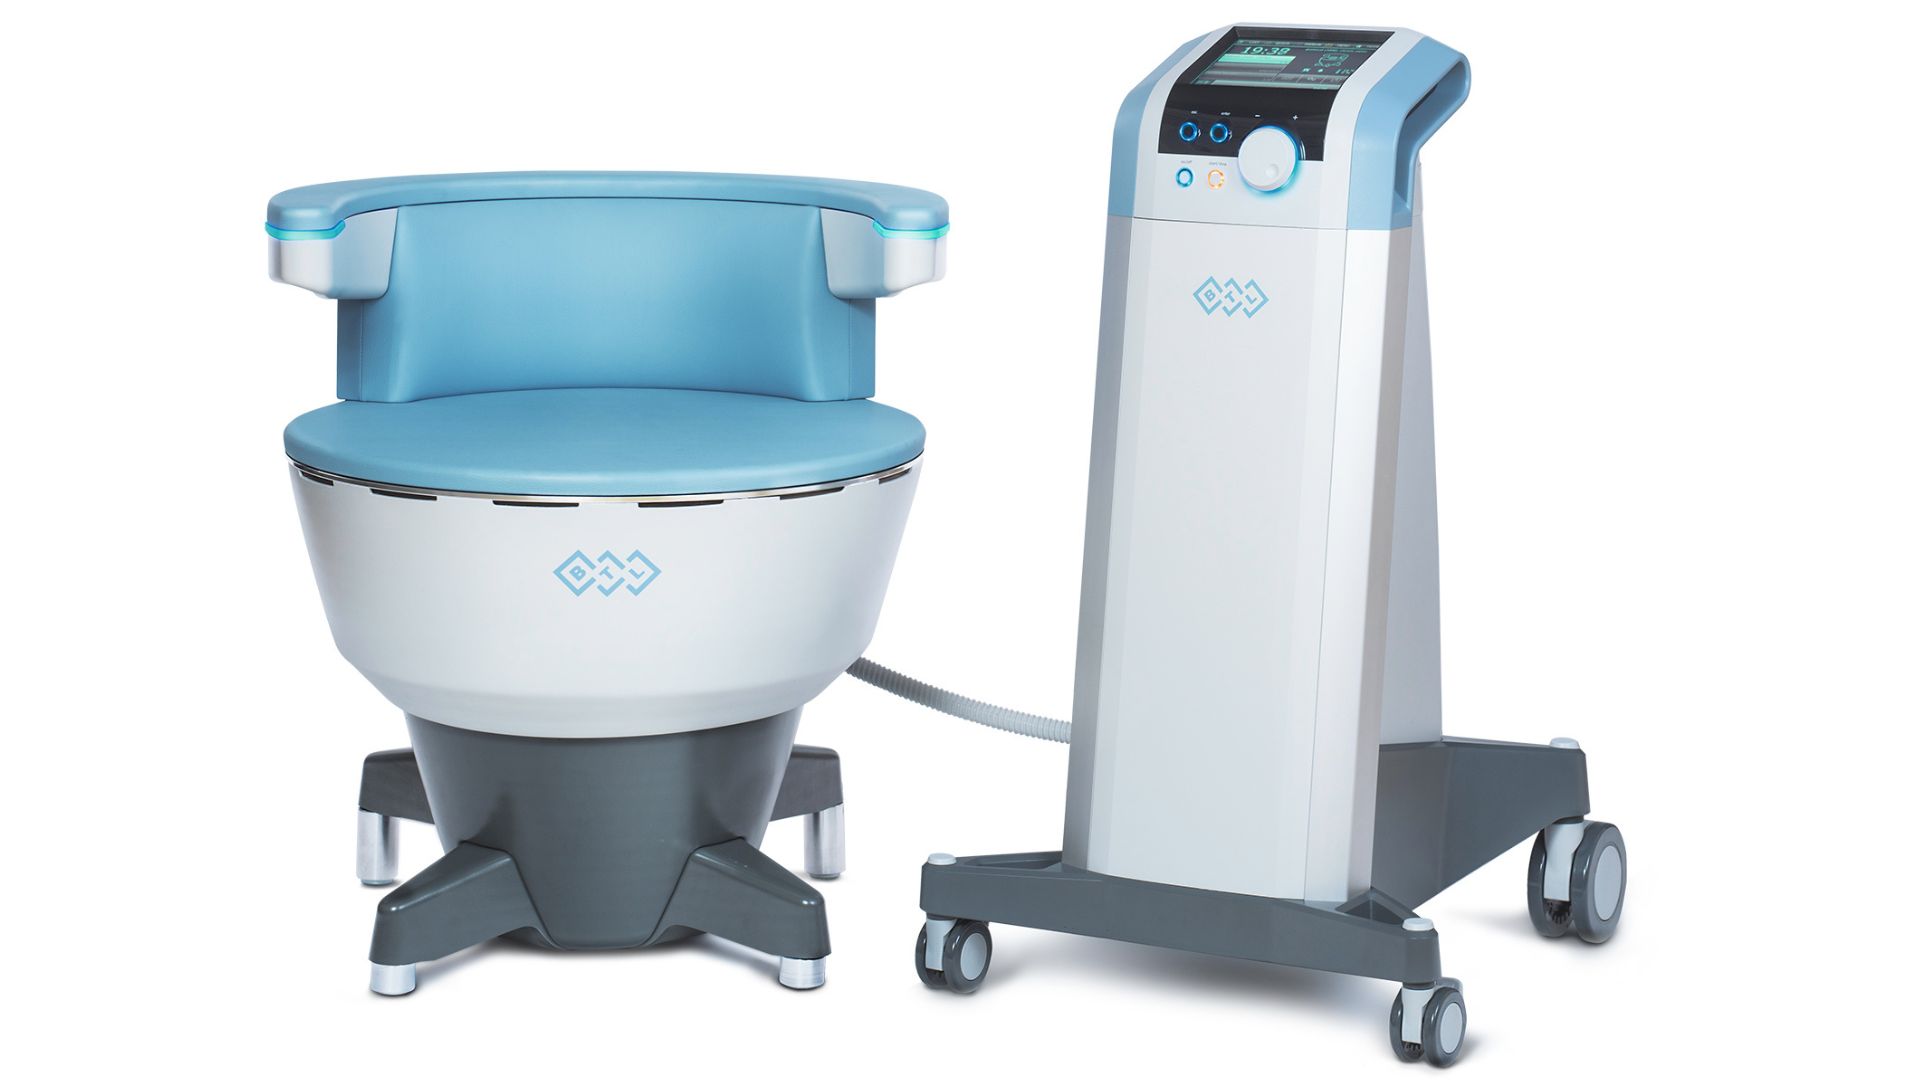 BTL Emstella Incontinence Treatment System - Chair and Control Station